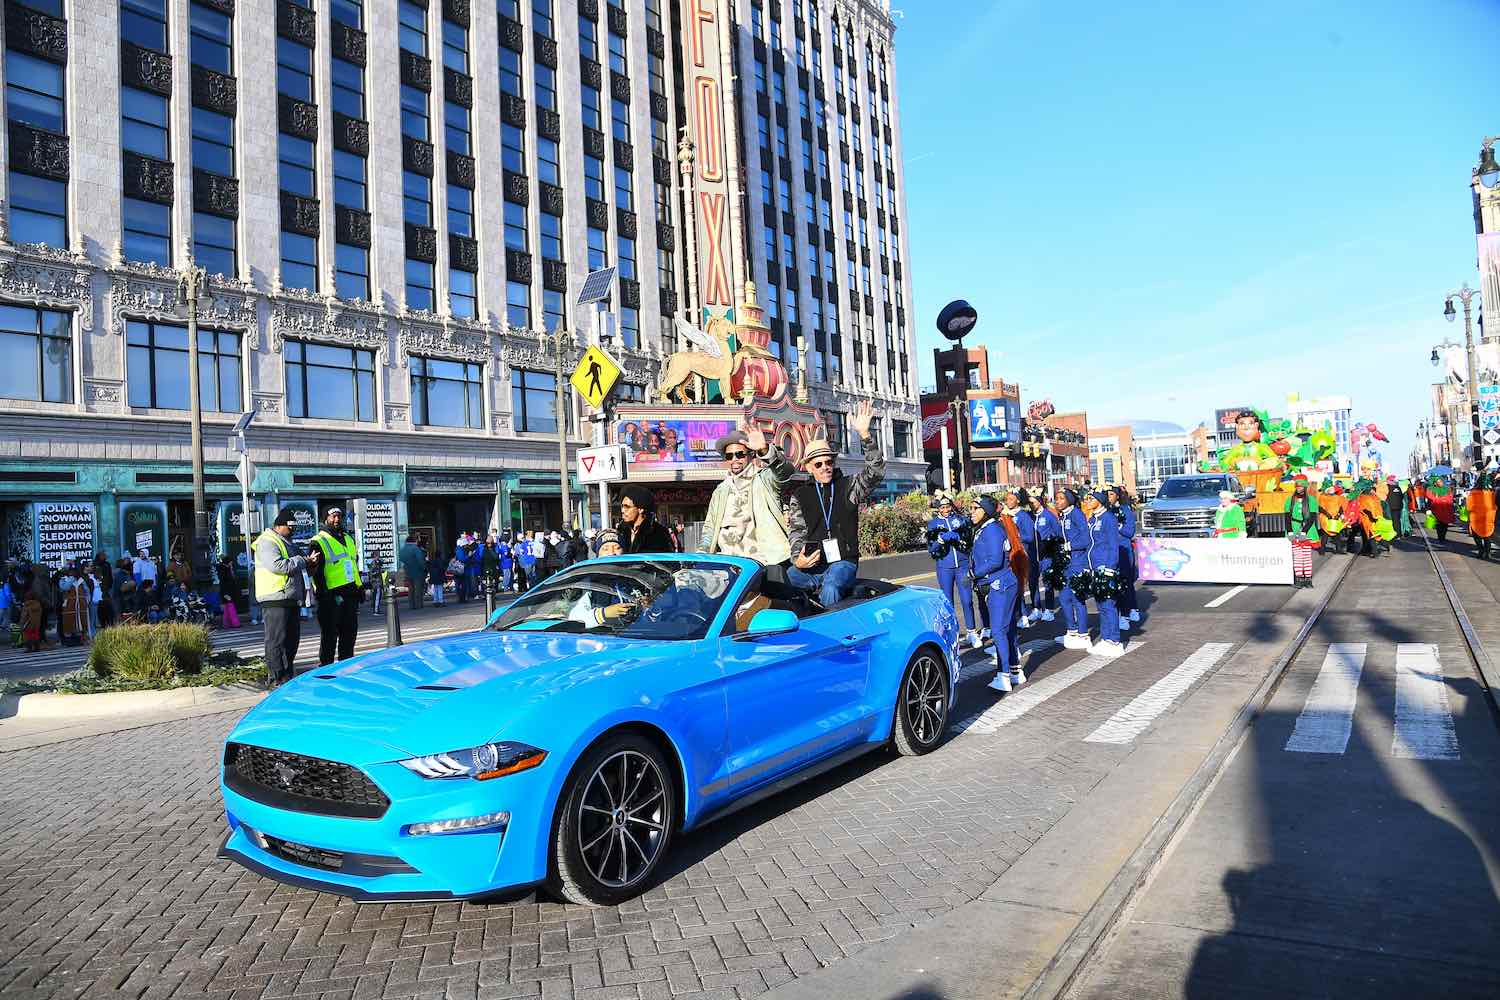 A bright blue Mustang leads a thanksgiving parade down Detroit Michigan's Woodward Avenue.